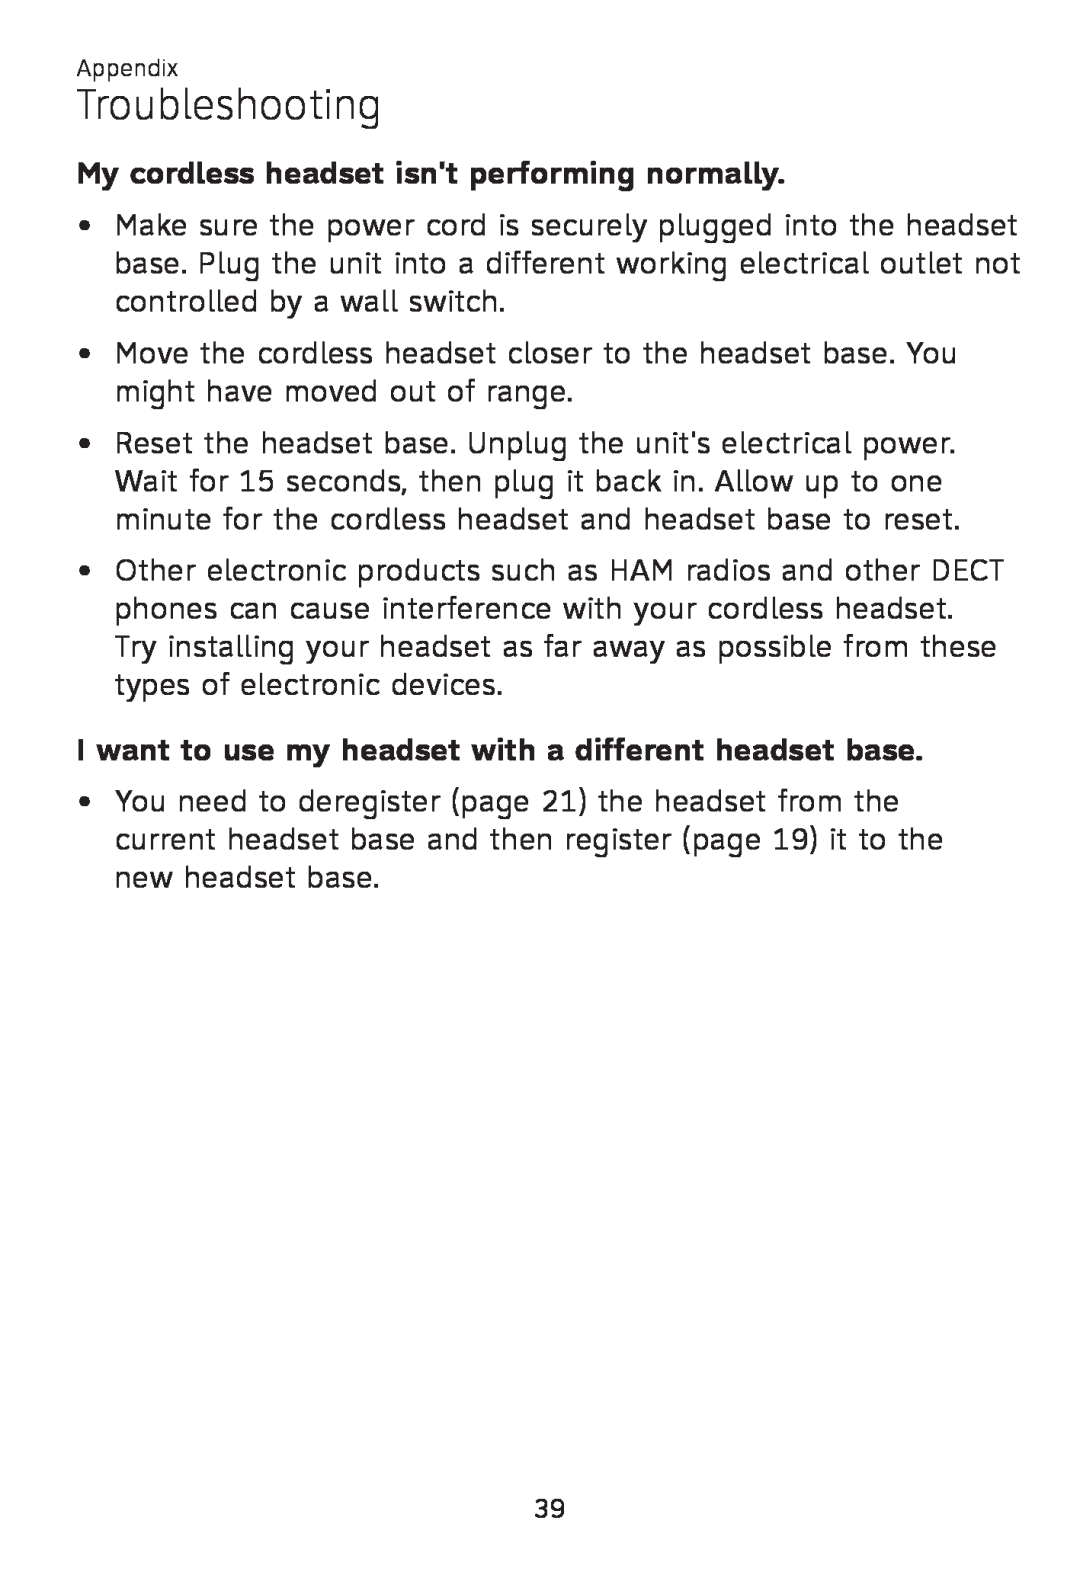 AT&T TL 7610 My cordless headset isnt performing normally, I want to use my headset with a different headset base 